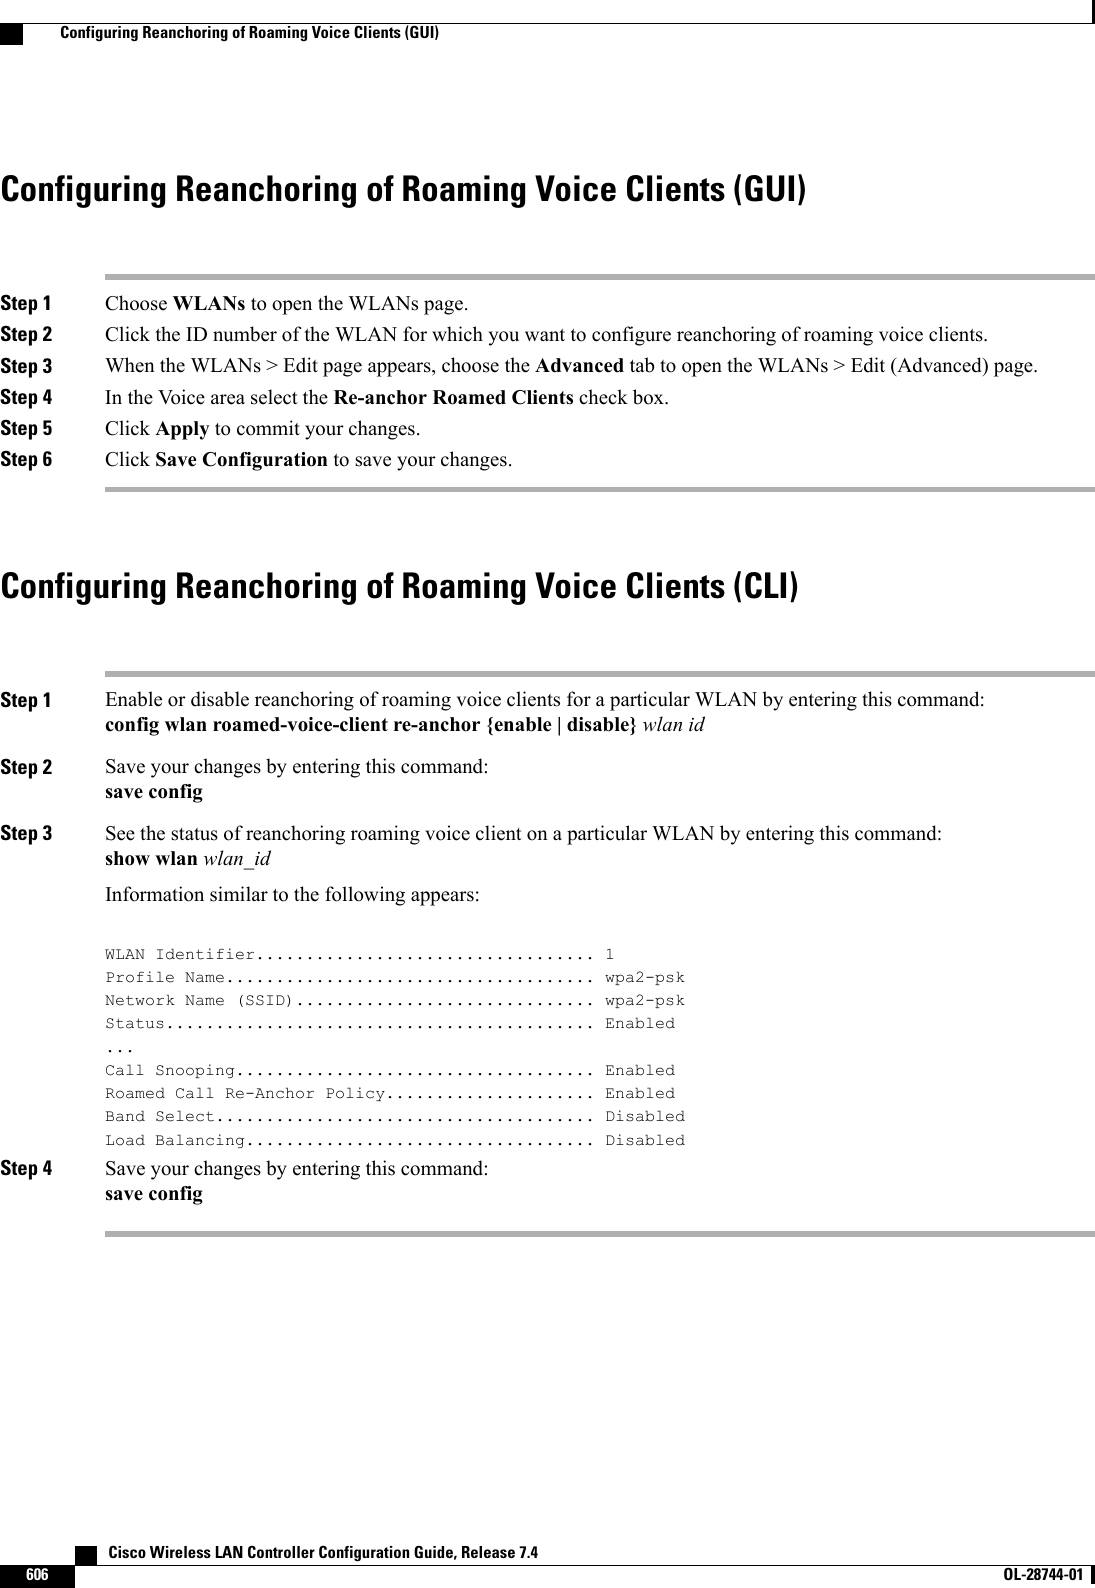 Configuring Reanchoring of Roaming Voice Clients (GUI)Step 1 Choose WLANs to open the WLANs page.Step 2 Click the ID number of the WLAN for which you want to configure reanchoring of roaming voice clients.Step 3 When the WLANs &gt; Edit page appears, choose the Advanced tab to open the WLANs &gt; Edit (Advanced) page.Step 4 In the Voice area select the Re-anchor Roamed Clients check box.Step 5 Click Apply to commit your changes.Step 6 Click Save Configuration to save your changes.Configuring Reanchoring of Roaming Voice Clients (CLI)Step 1 Enable or disable reanchoring of roaming voice clients for a particular WLAN by entering this command:config wlan roamed-voice-client re-anchor {enable | disable} wlan idStep 2 Save your changes by entering this command:save configStep 3 See the status of reanchoring roaming voice client on a particular WLAN by entering this command:show wlan wlan_idInformation similar to the following appears:WLAN Identifier.................................. 1Profile Name..................................... wpa2-pskNetwork Name (SSID).............................. wpa2-pskStatus........................................... Enabled...Call Snooping.................................... EnabledRoamed Call Re-Anchor Policy..................... EnabledBand Select...................................... DisabledLoad Balancing................................... DisabledStep 4 Save your changes by entering this command:save config   Cisco Wireless LAN Controller Configuration Guide, Release 7.4606 OL-28744-01  Configuring Reanchoring of Roaming Voice Clients (GUI)